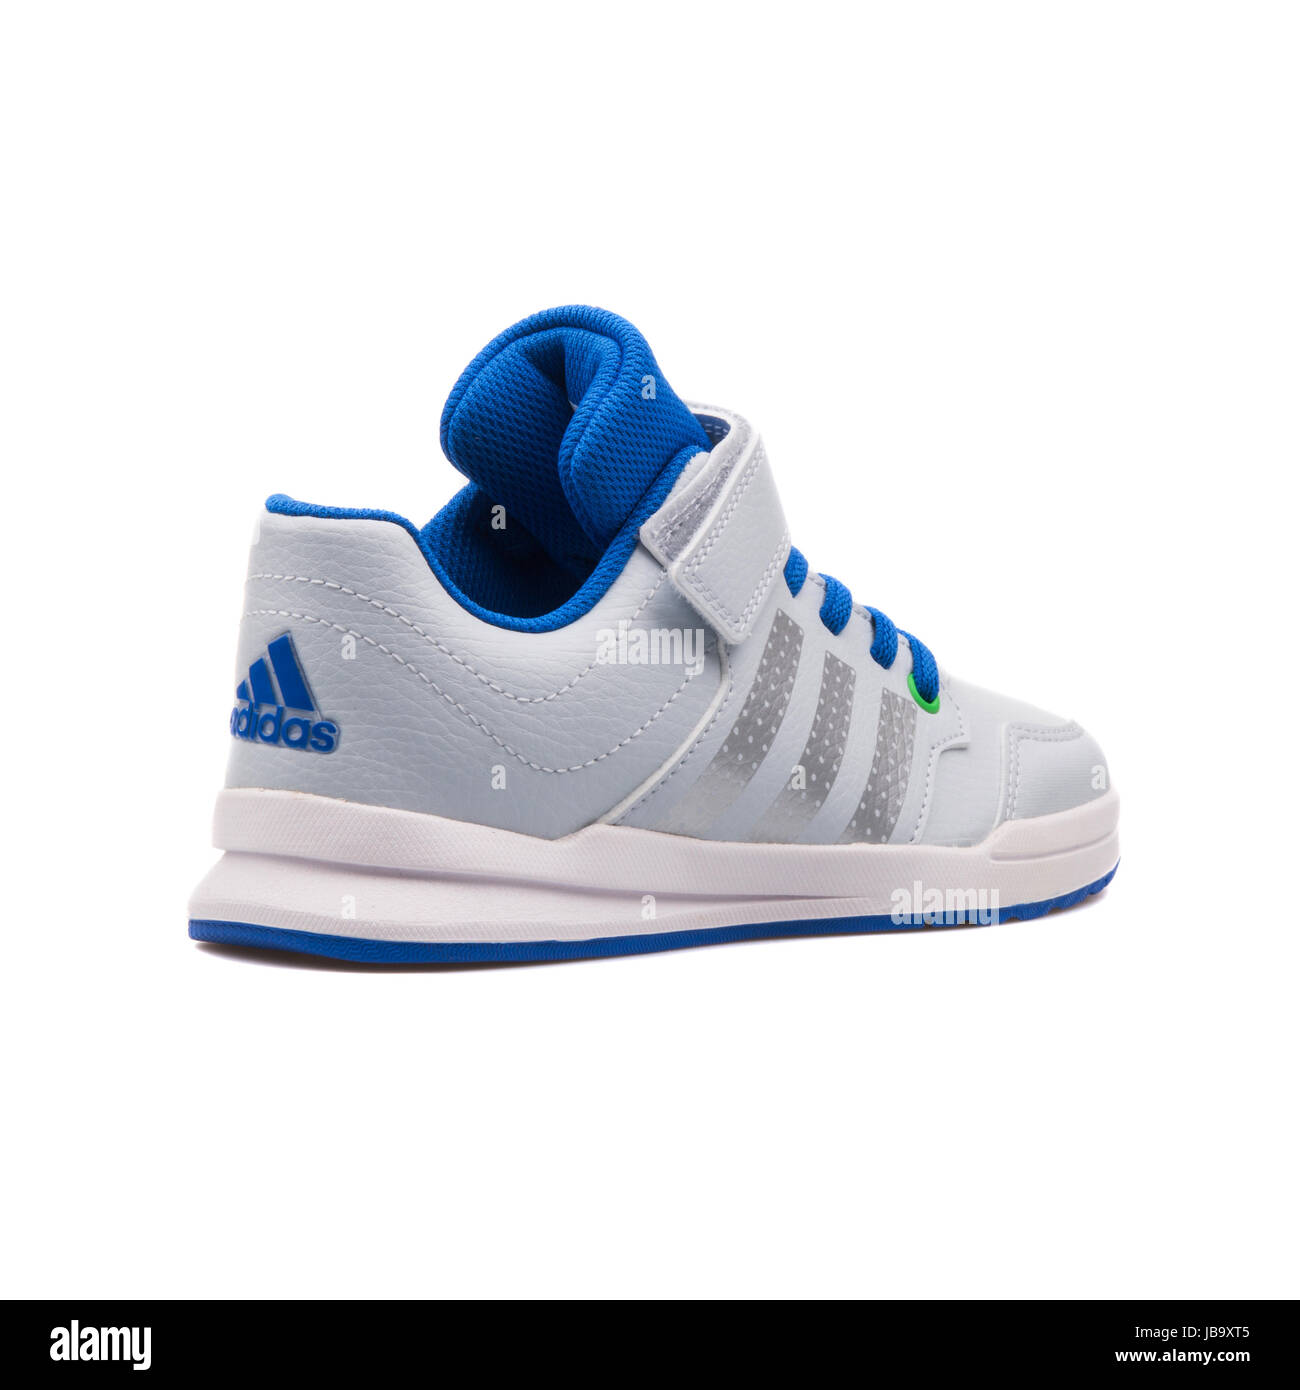 Adidas Jan BS 2 C Silver and Blue Kids Sports Shoes - B23904 Stock Photo -  Alamy